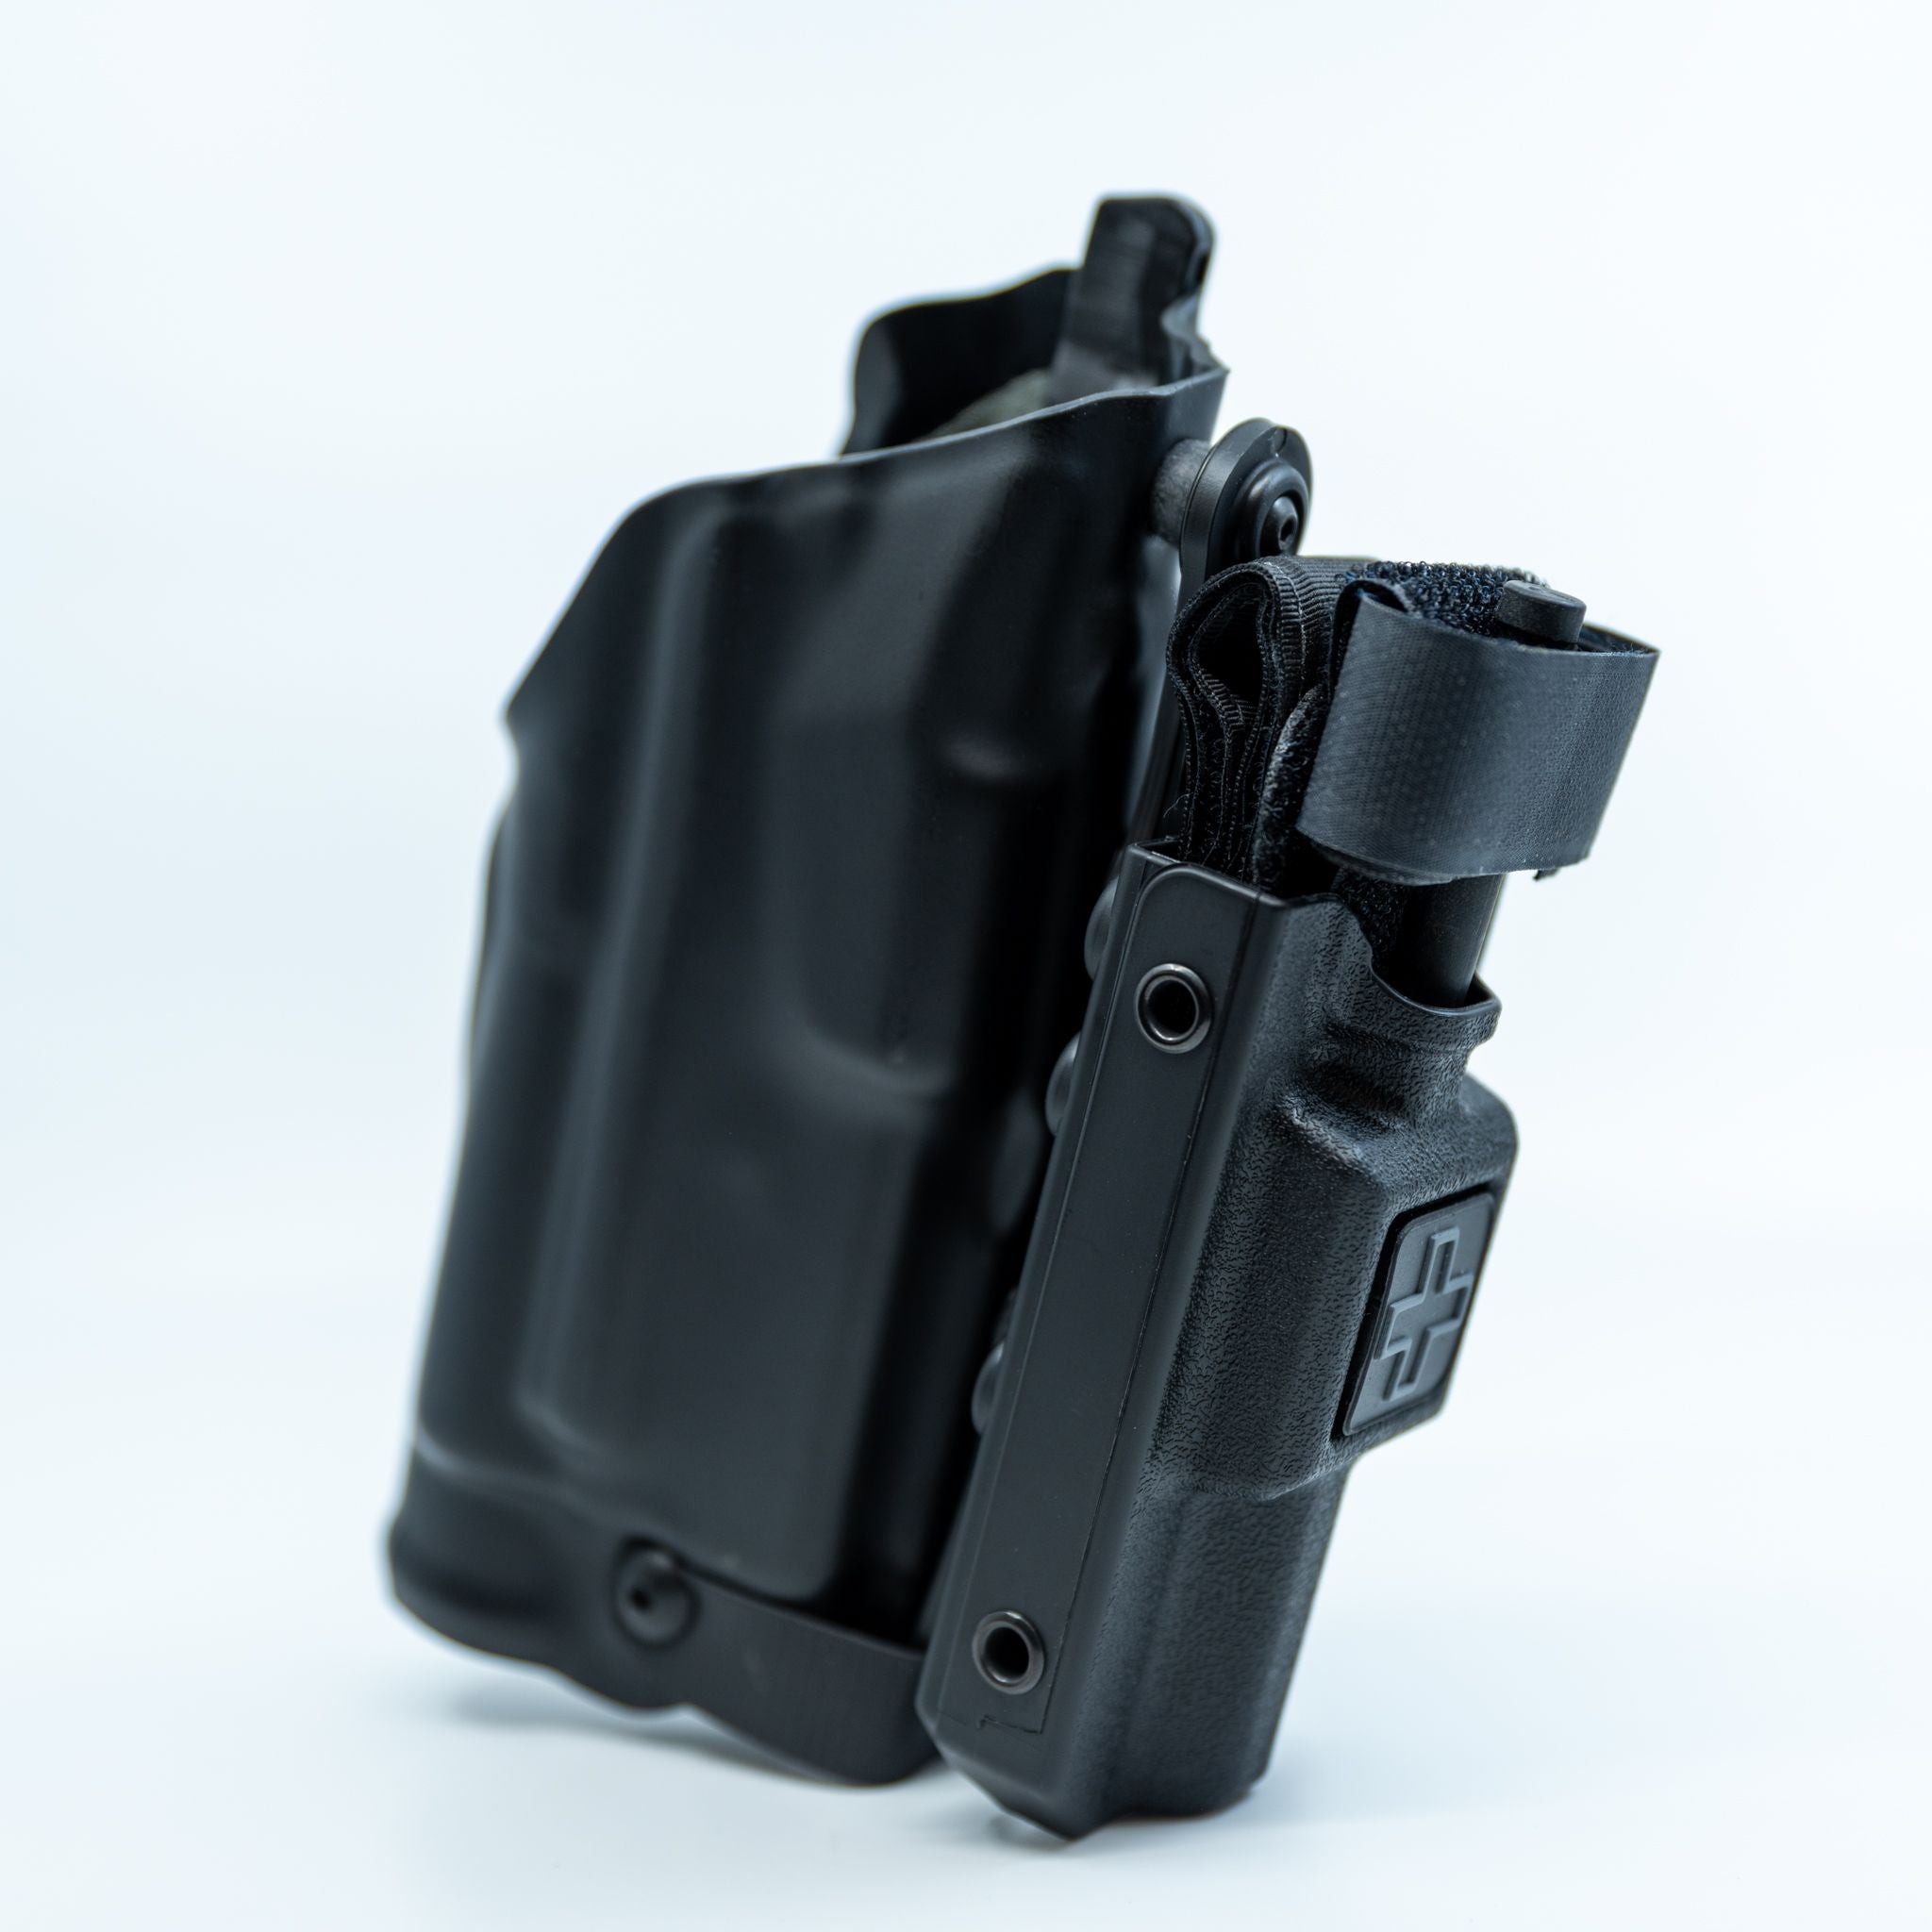 Need help with a safariland holster ! what adapter would I need to